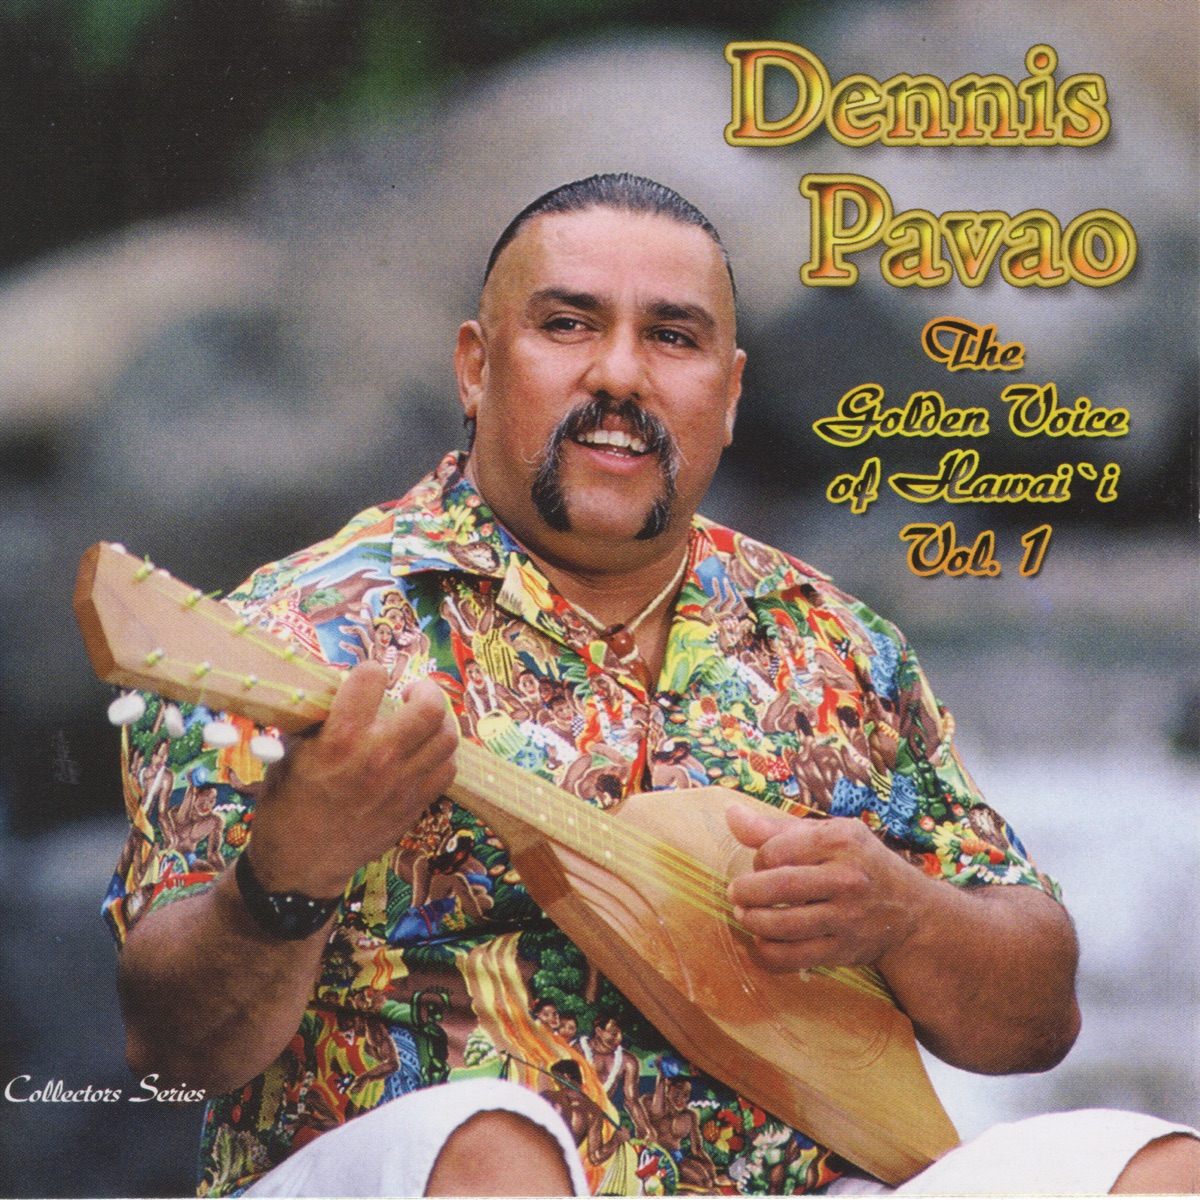 All Hawai'i Stand Together - Album by Dennis Pavao - Apple Music